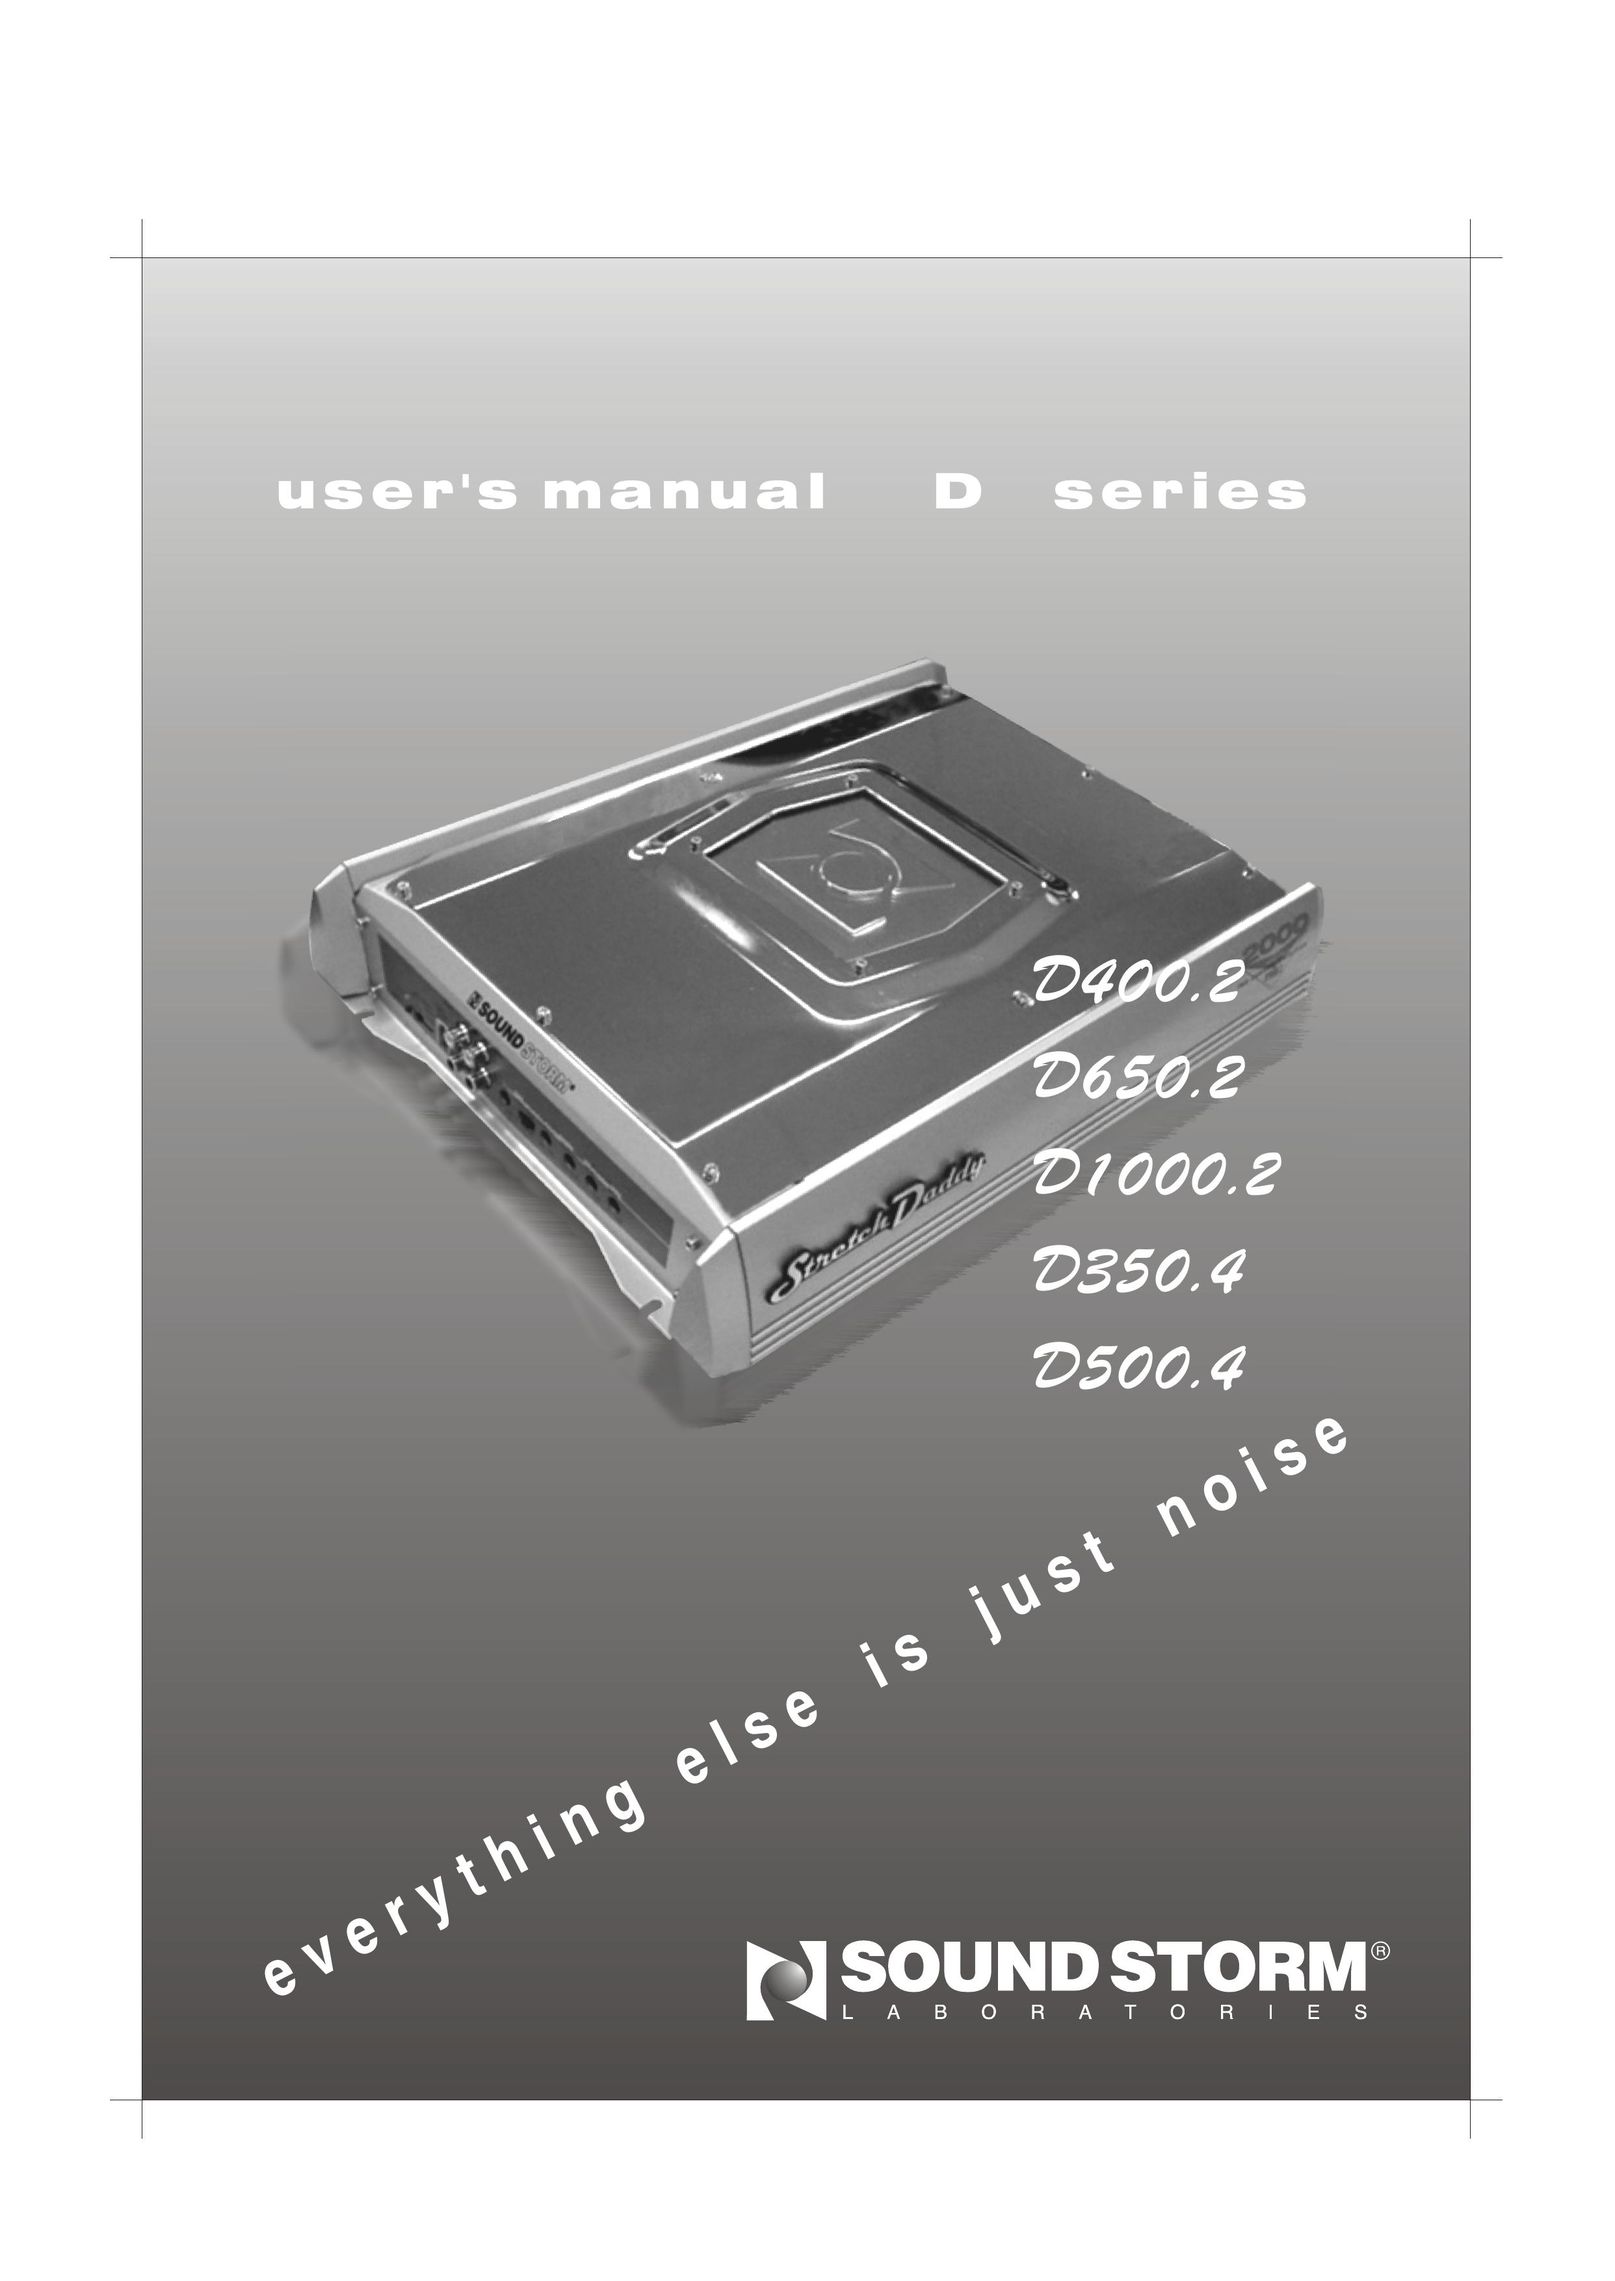 Sound Storm Laboratories D1000.2 Stereo Amplifier User Manual